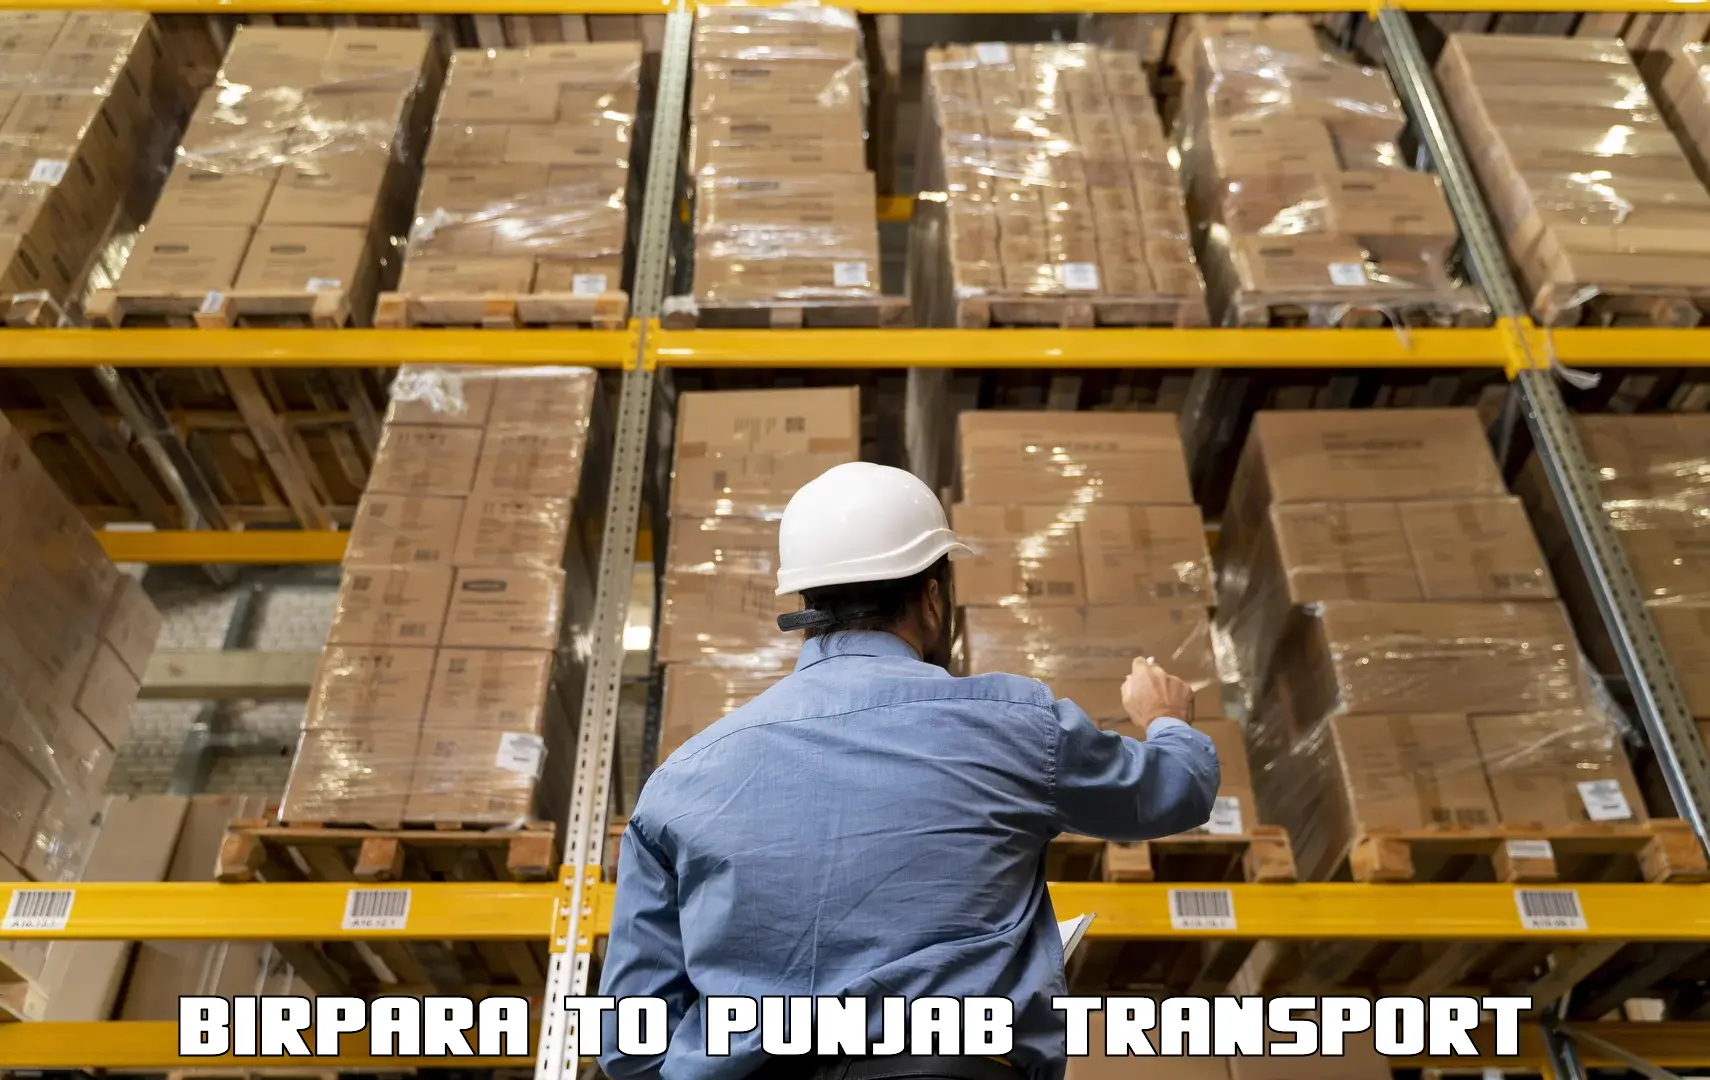 Pick up transport service in Birpara to Mohali